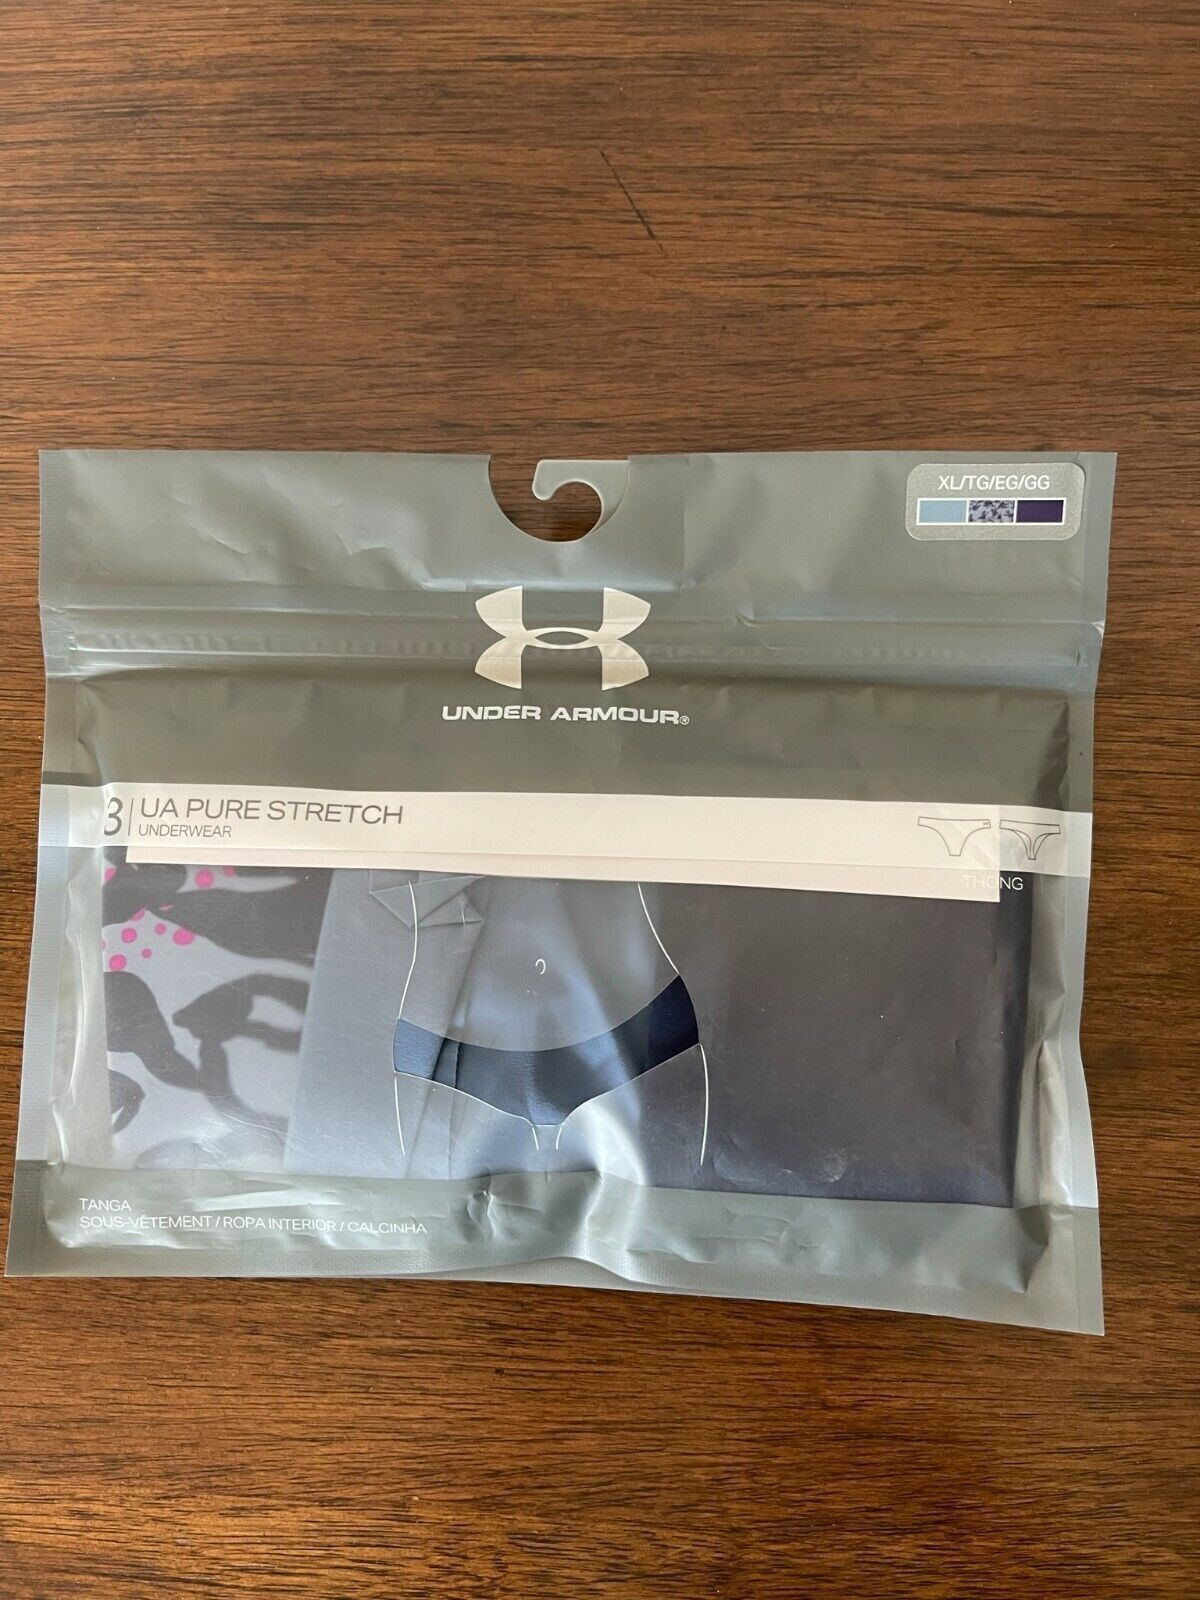 BNIP Under Armour Pure Stretch 3-Pack and similar items